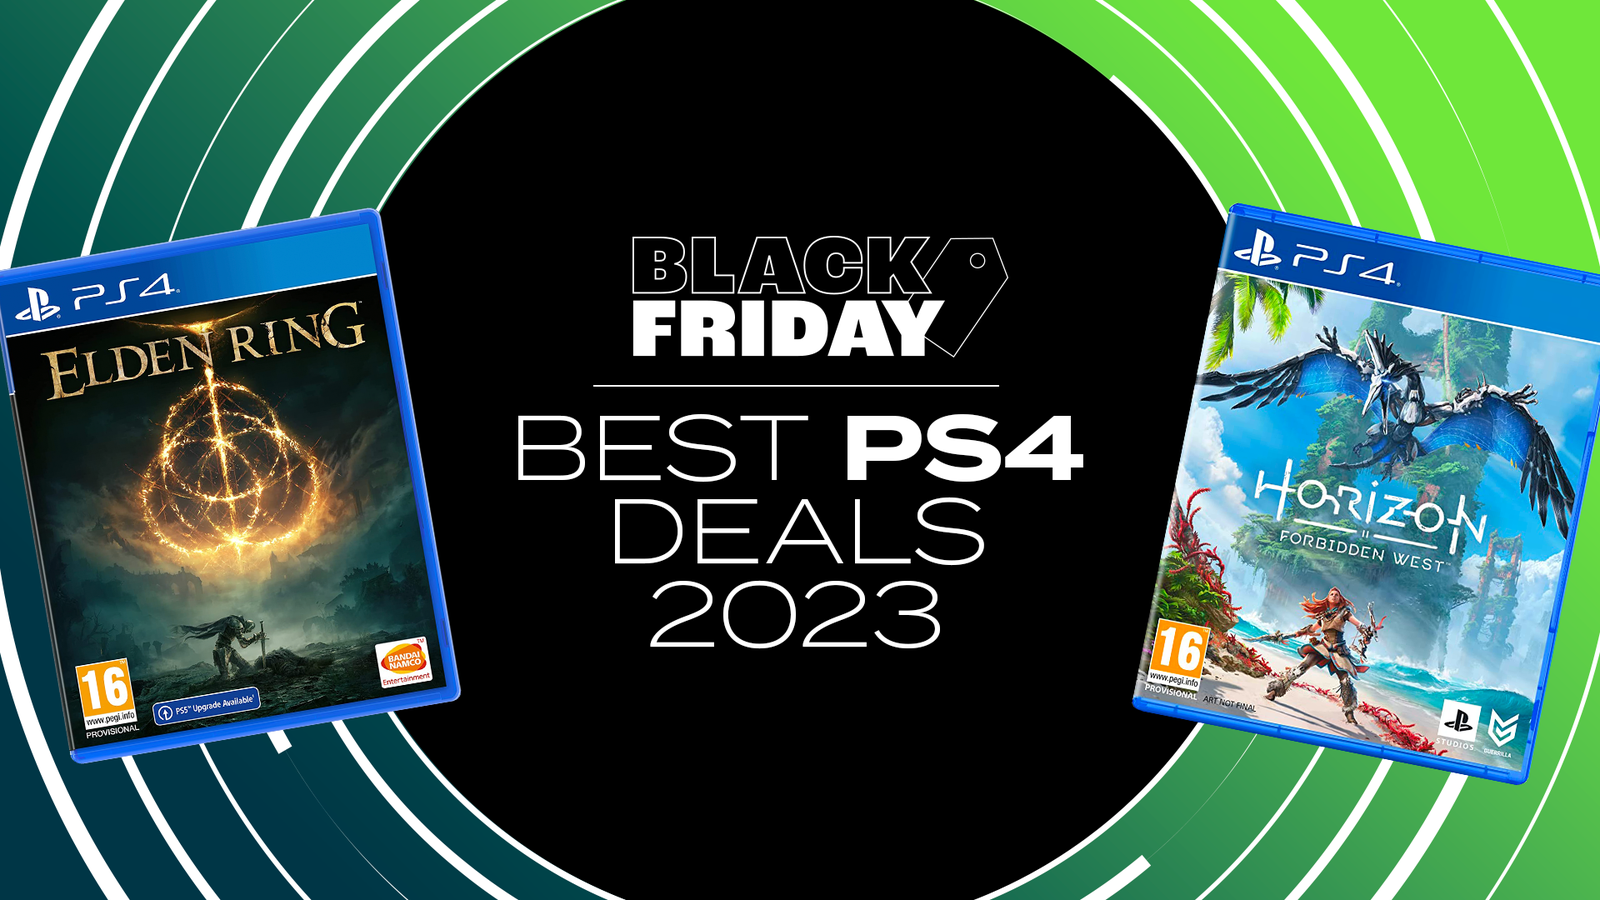 PlayStation Black Friday 2020 Sale Has Deals on 'Last of Us,' 'Tsushima'  and More